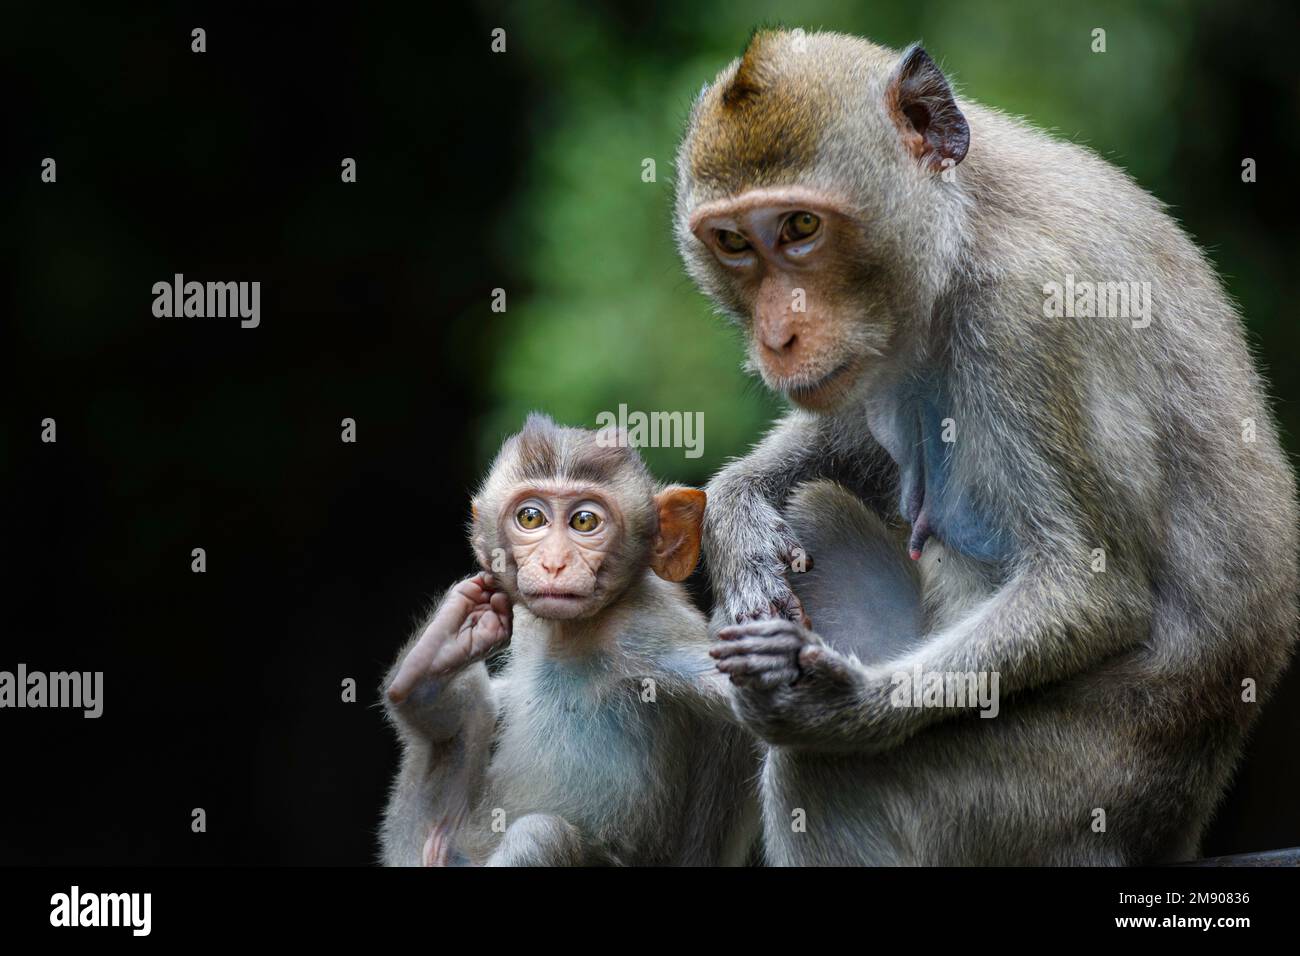 cute asia monkey baby holding her mother hand and looking at camera in the wild in national park. Nature wildlife and animal love concept. Stock Photo